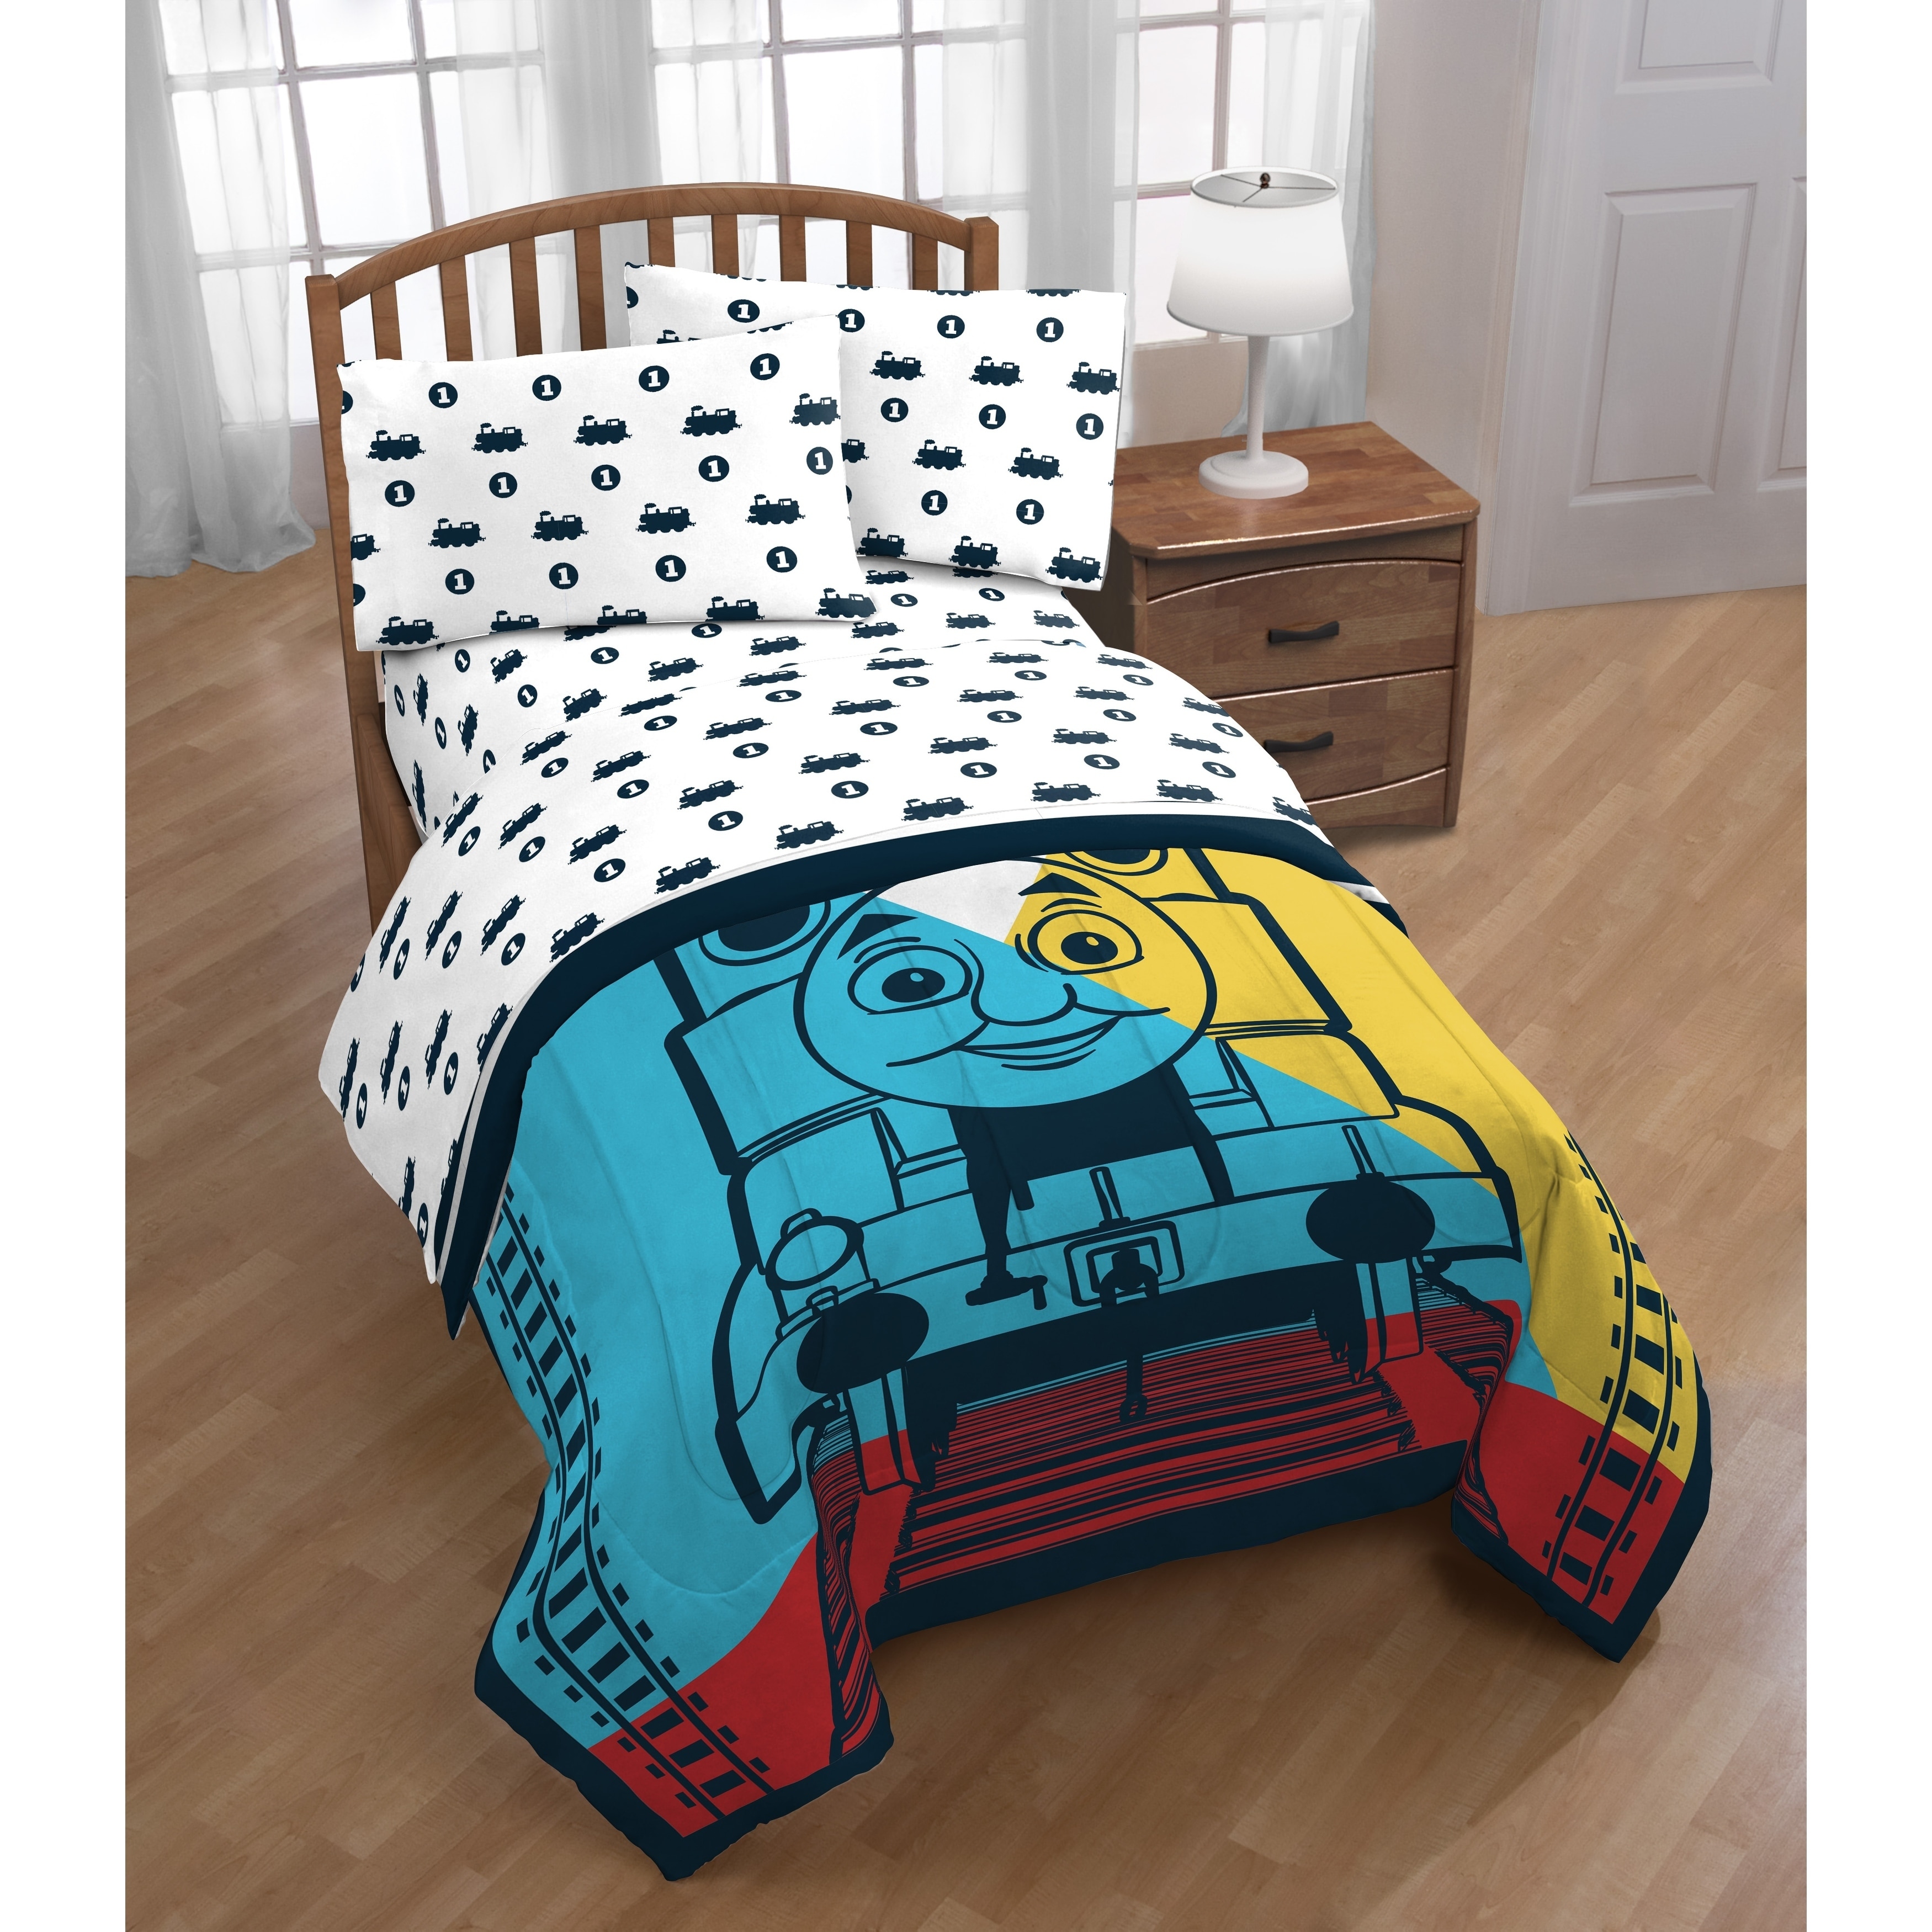 Shop Mattel Thomas The Tank Engine 4 Piece Twin Bed In A Bag